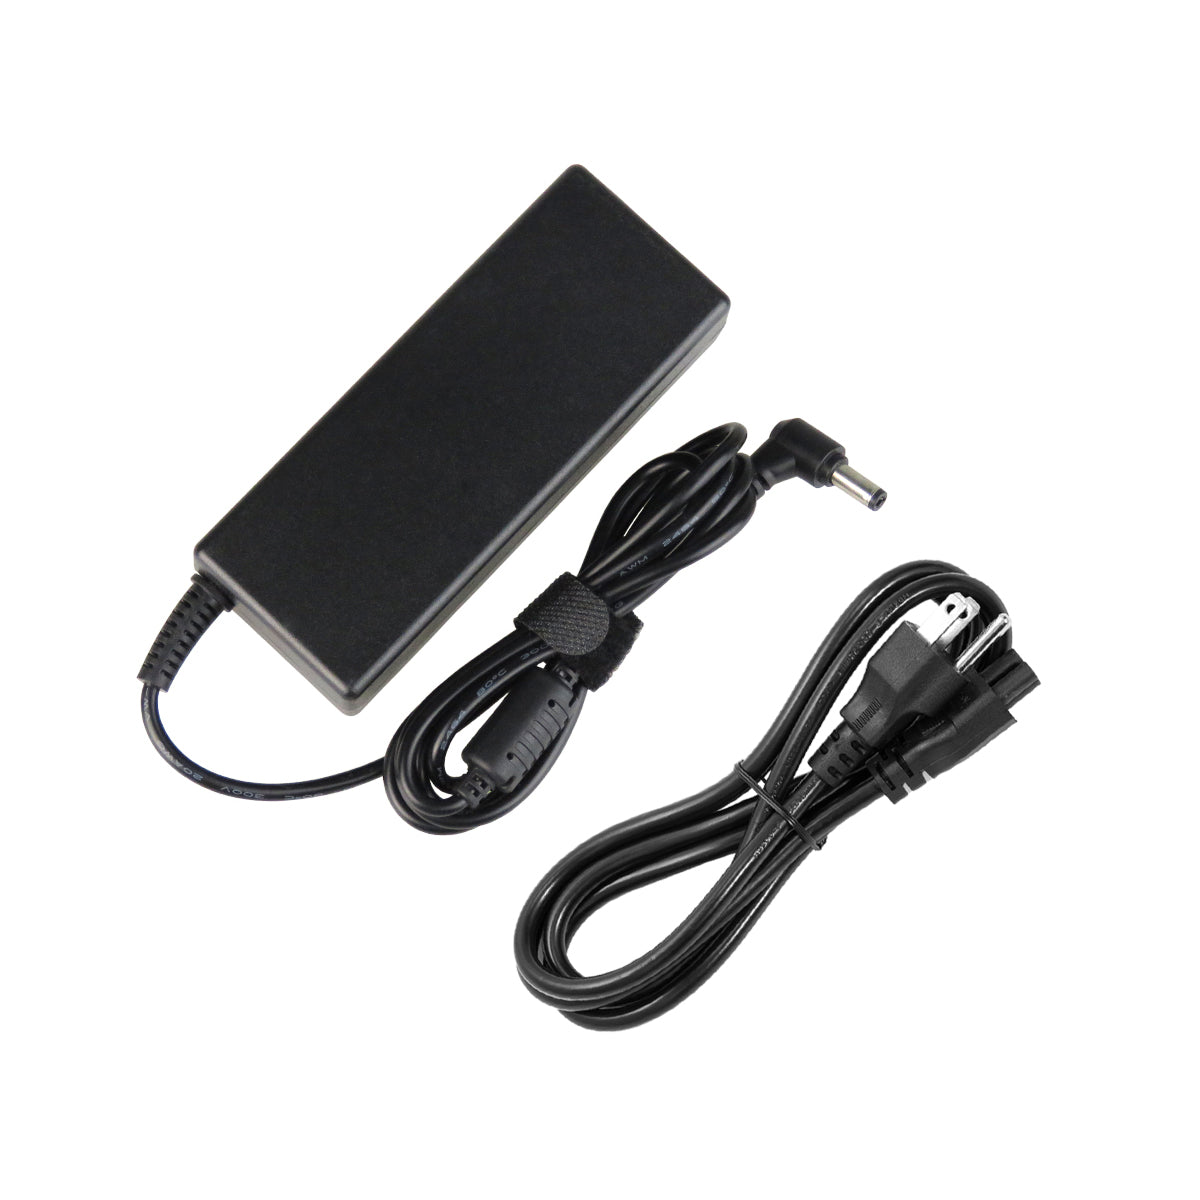 AC Adapter Charger for ASUS X50SLi Notebook.